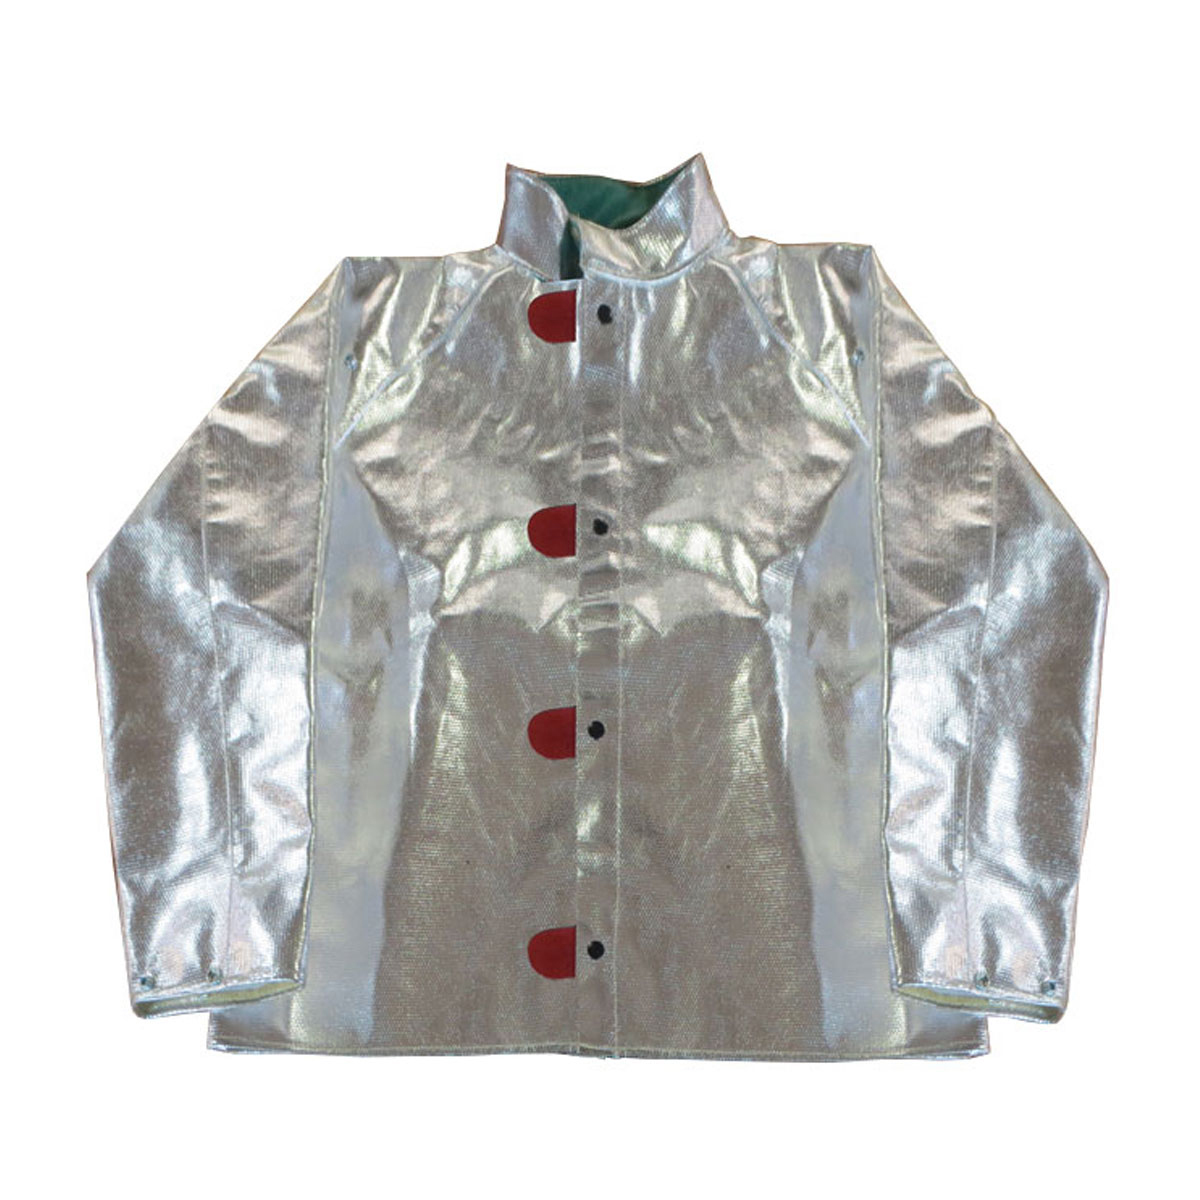 Chicago Protective Apparel Large Silver Aluminized Rayon Heat Resistant Jacket